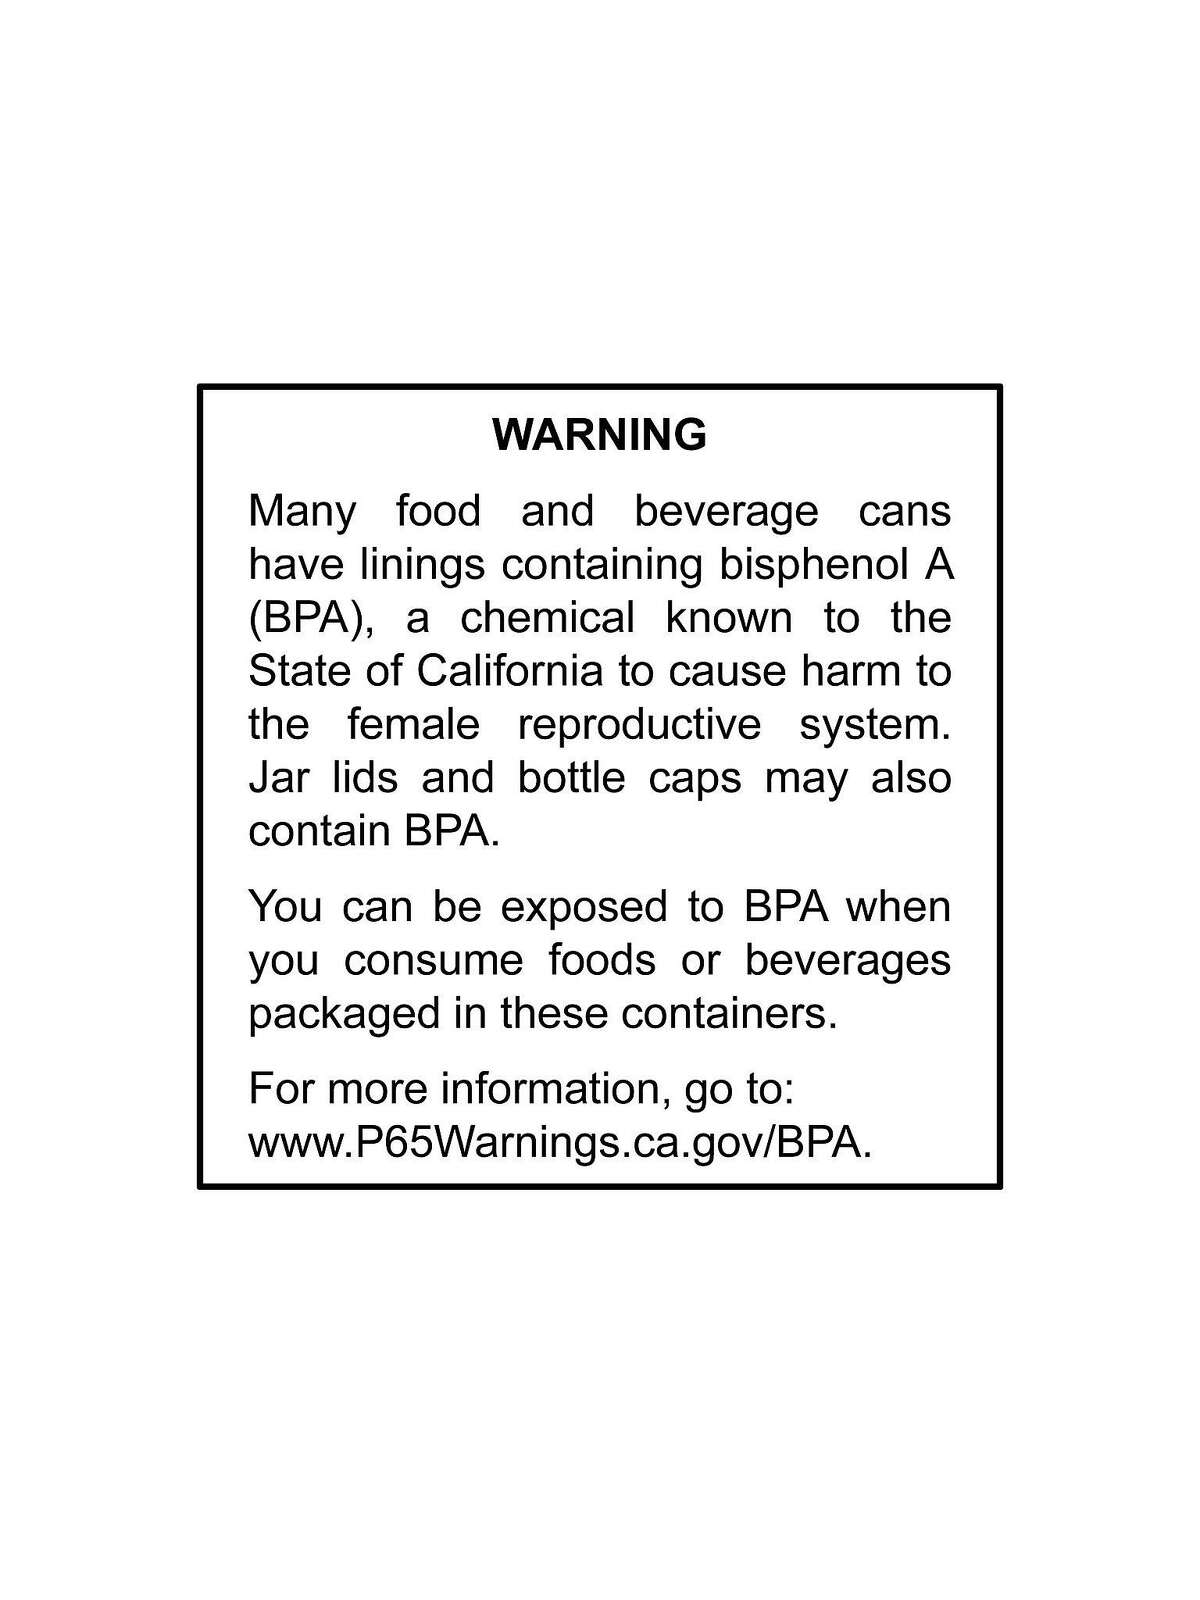 California's Proposition 65 requires businesses to determine if they must provide this general warning about exposures to listed chemicals.